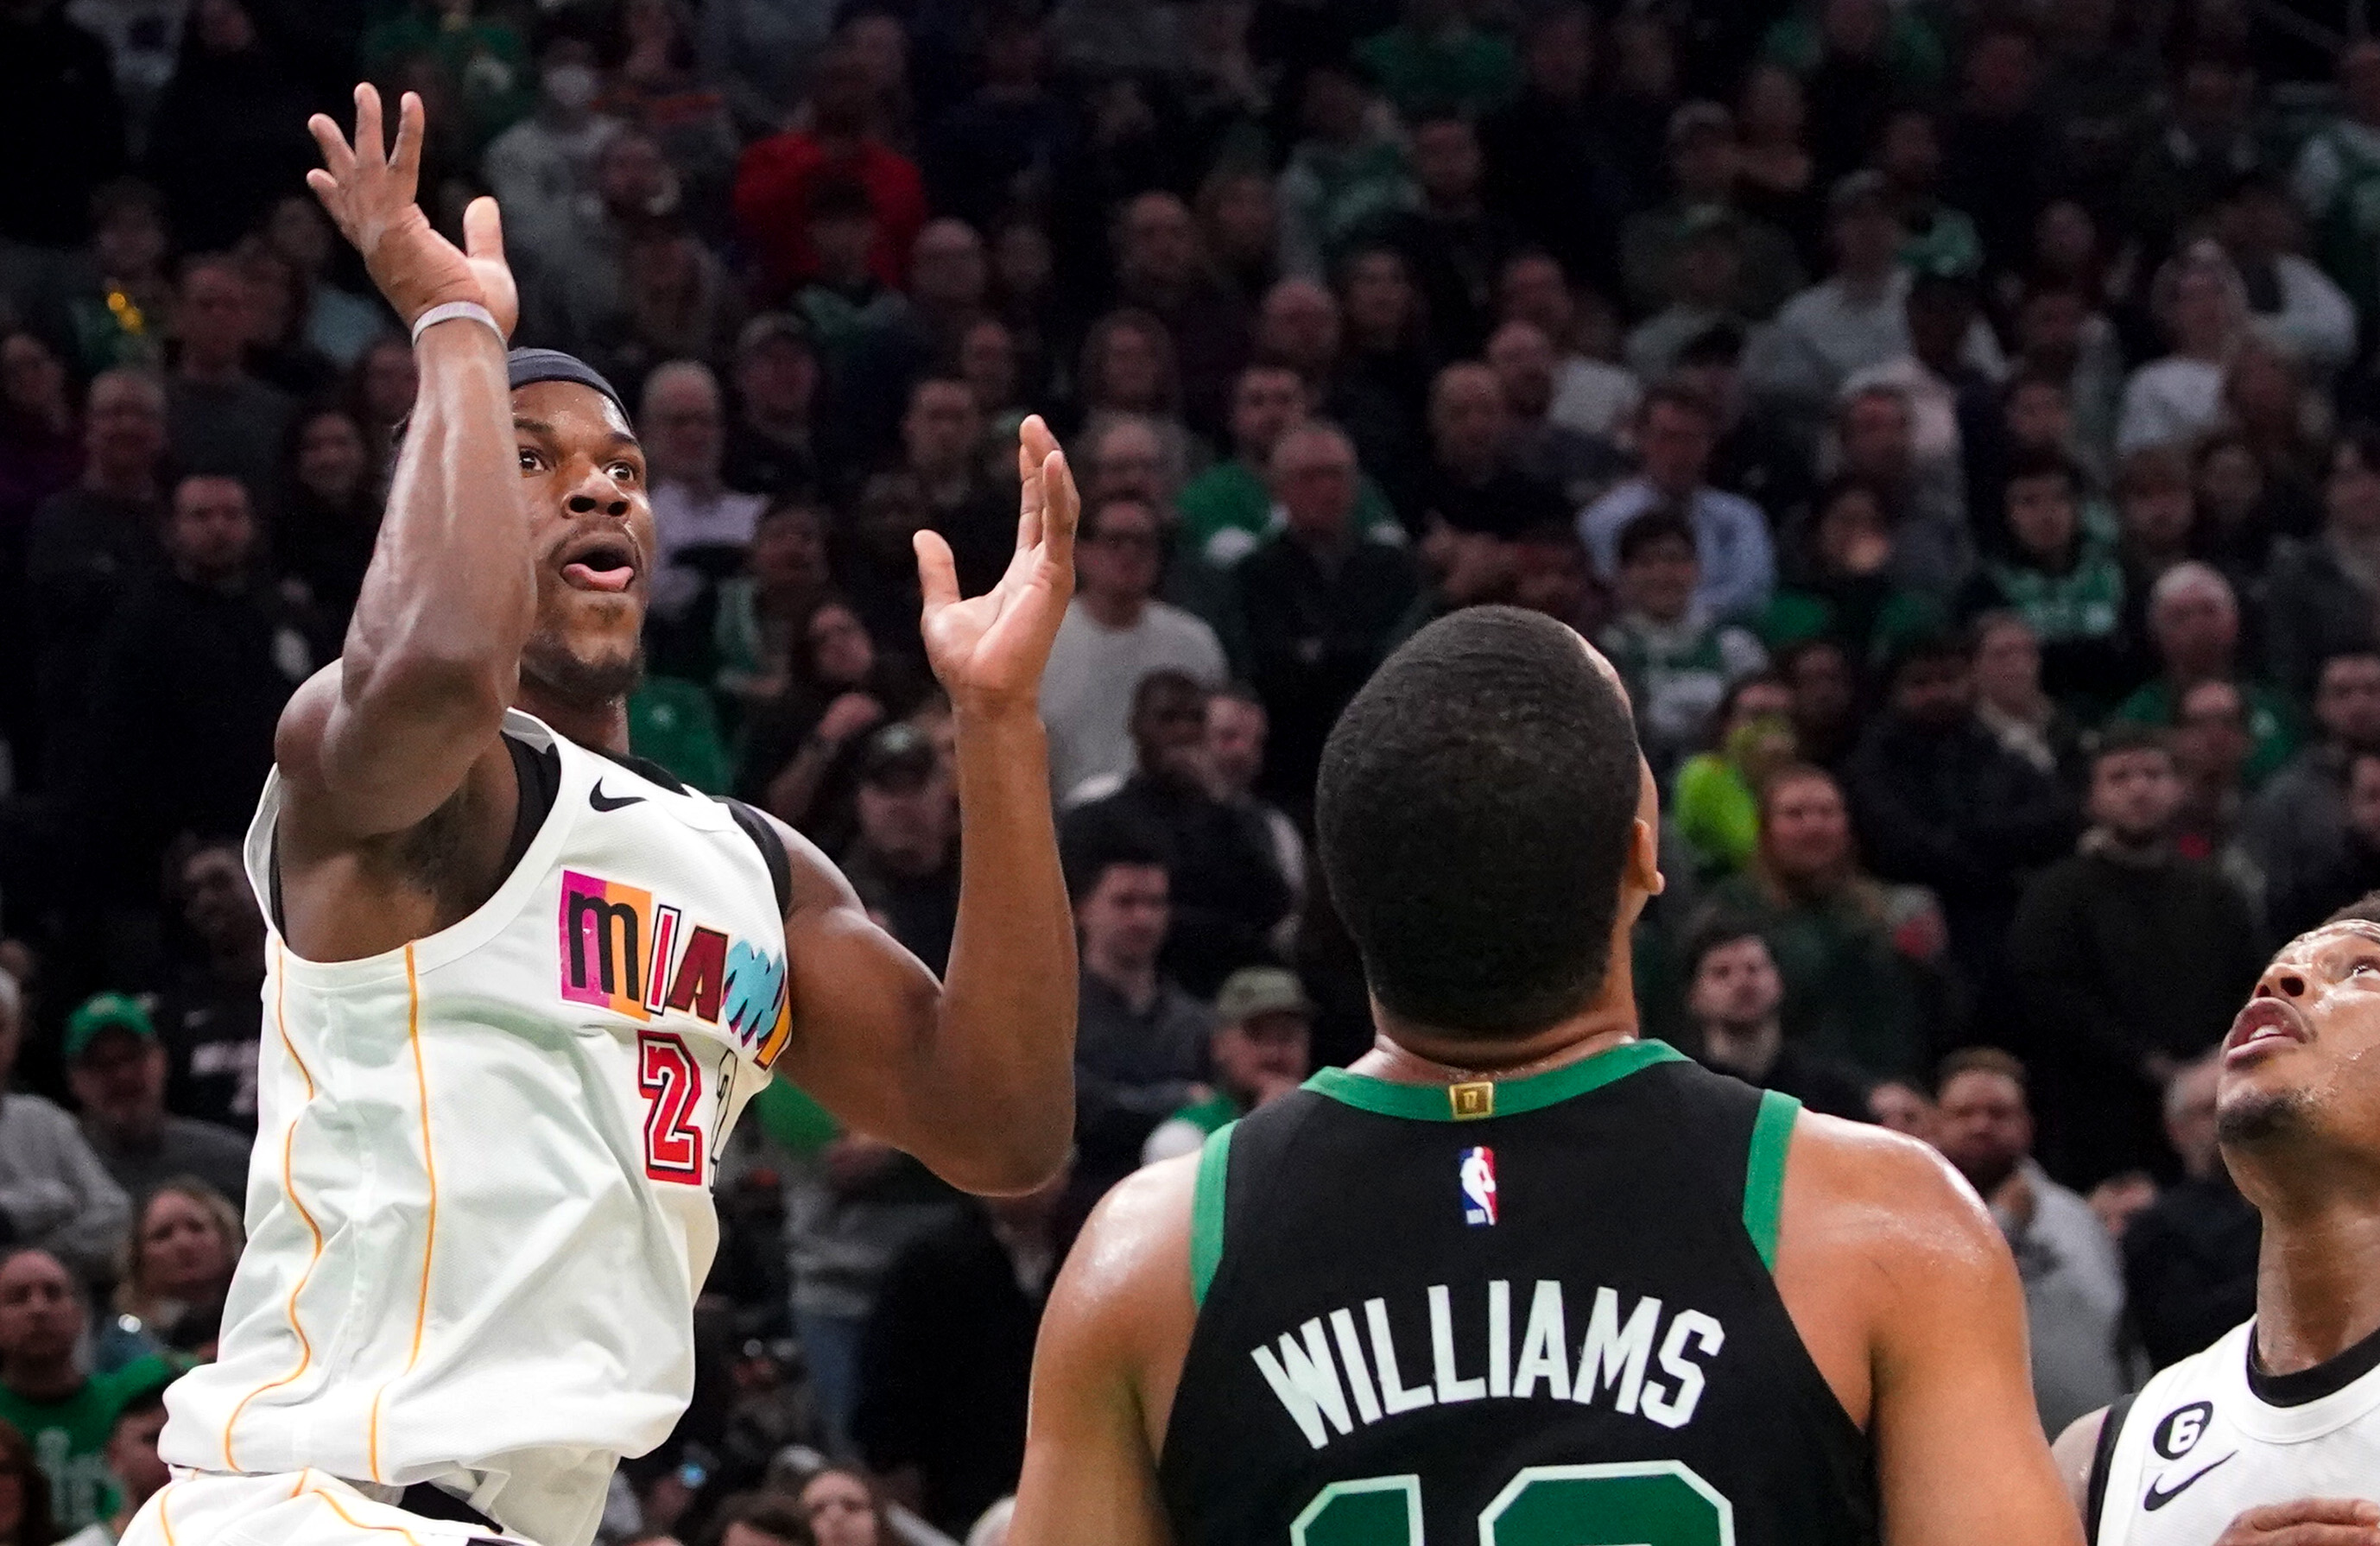 Jimmy Butler shined as the Miami Heat set a new NBA record for free throws  made without a miss